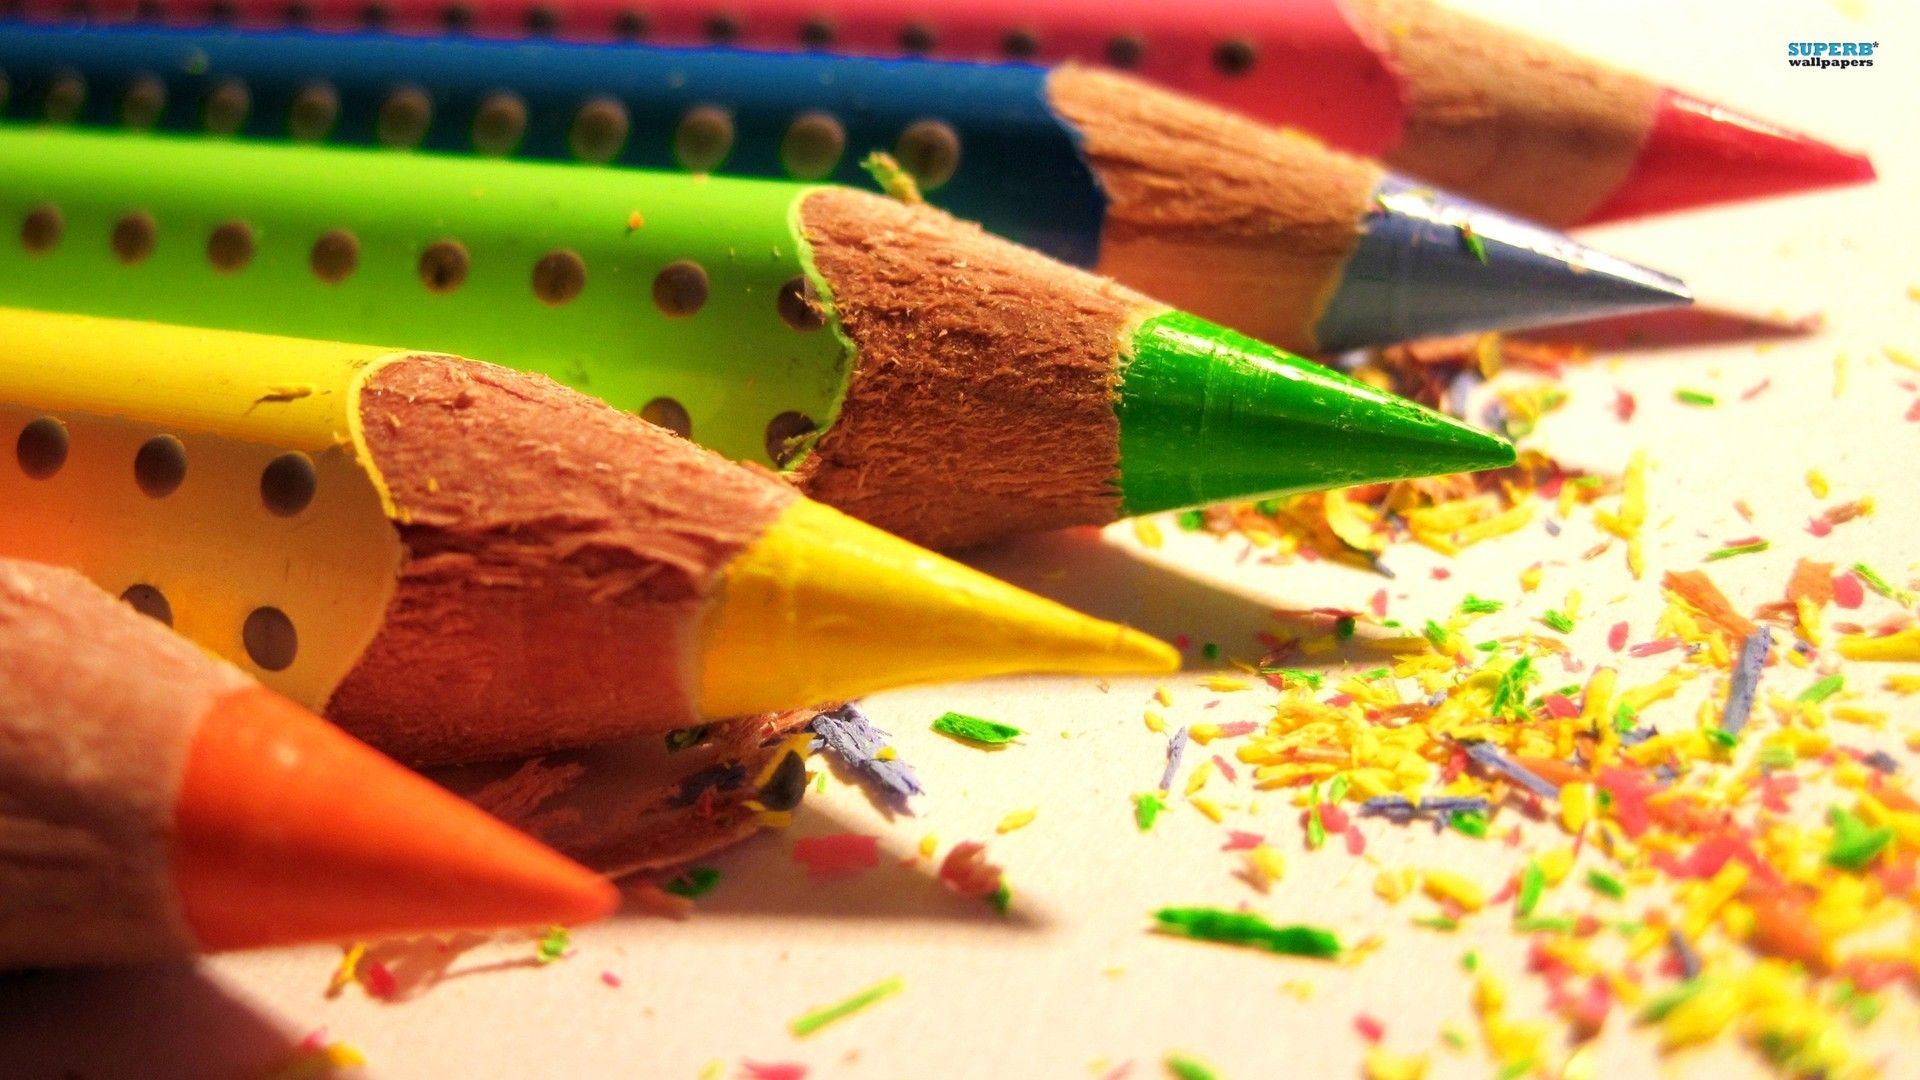 Colored pencils wallpaper - Photography wallpapers - #6423